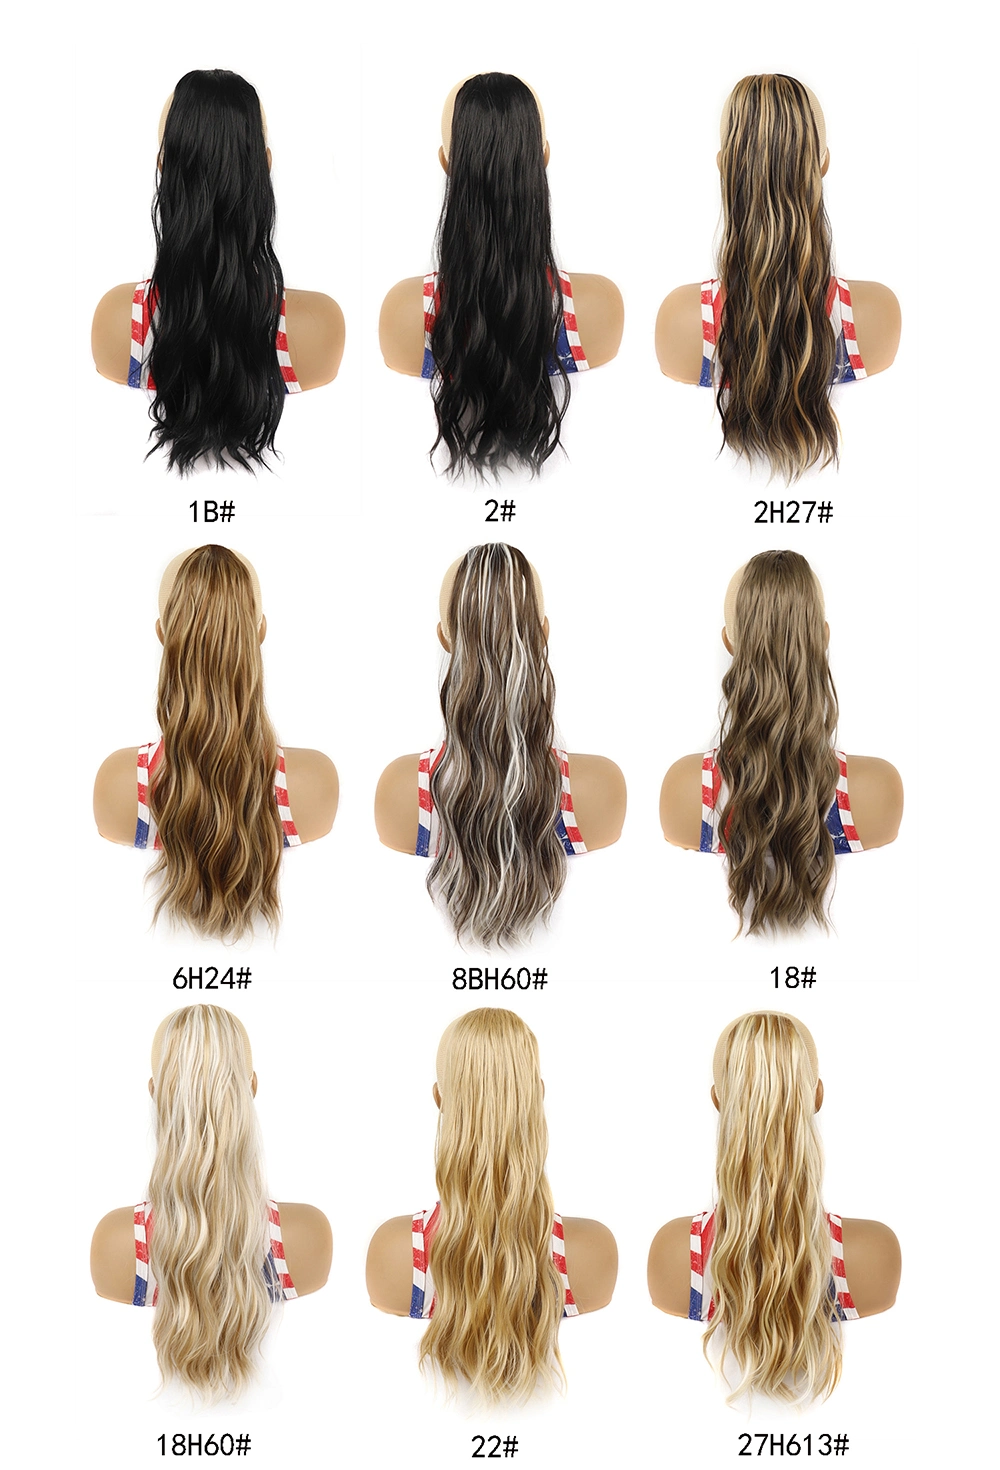 Wholesale Price High Quality 24 Inch Synthetic Loose Wavy Hairpiece Drawstring Clip Ponytail Hair Extensions